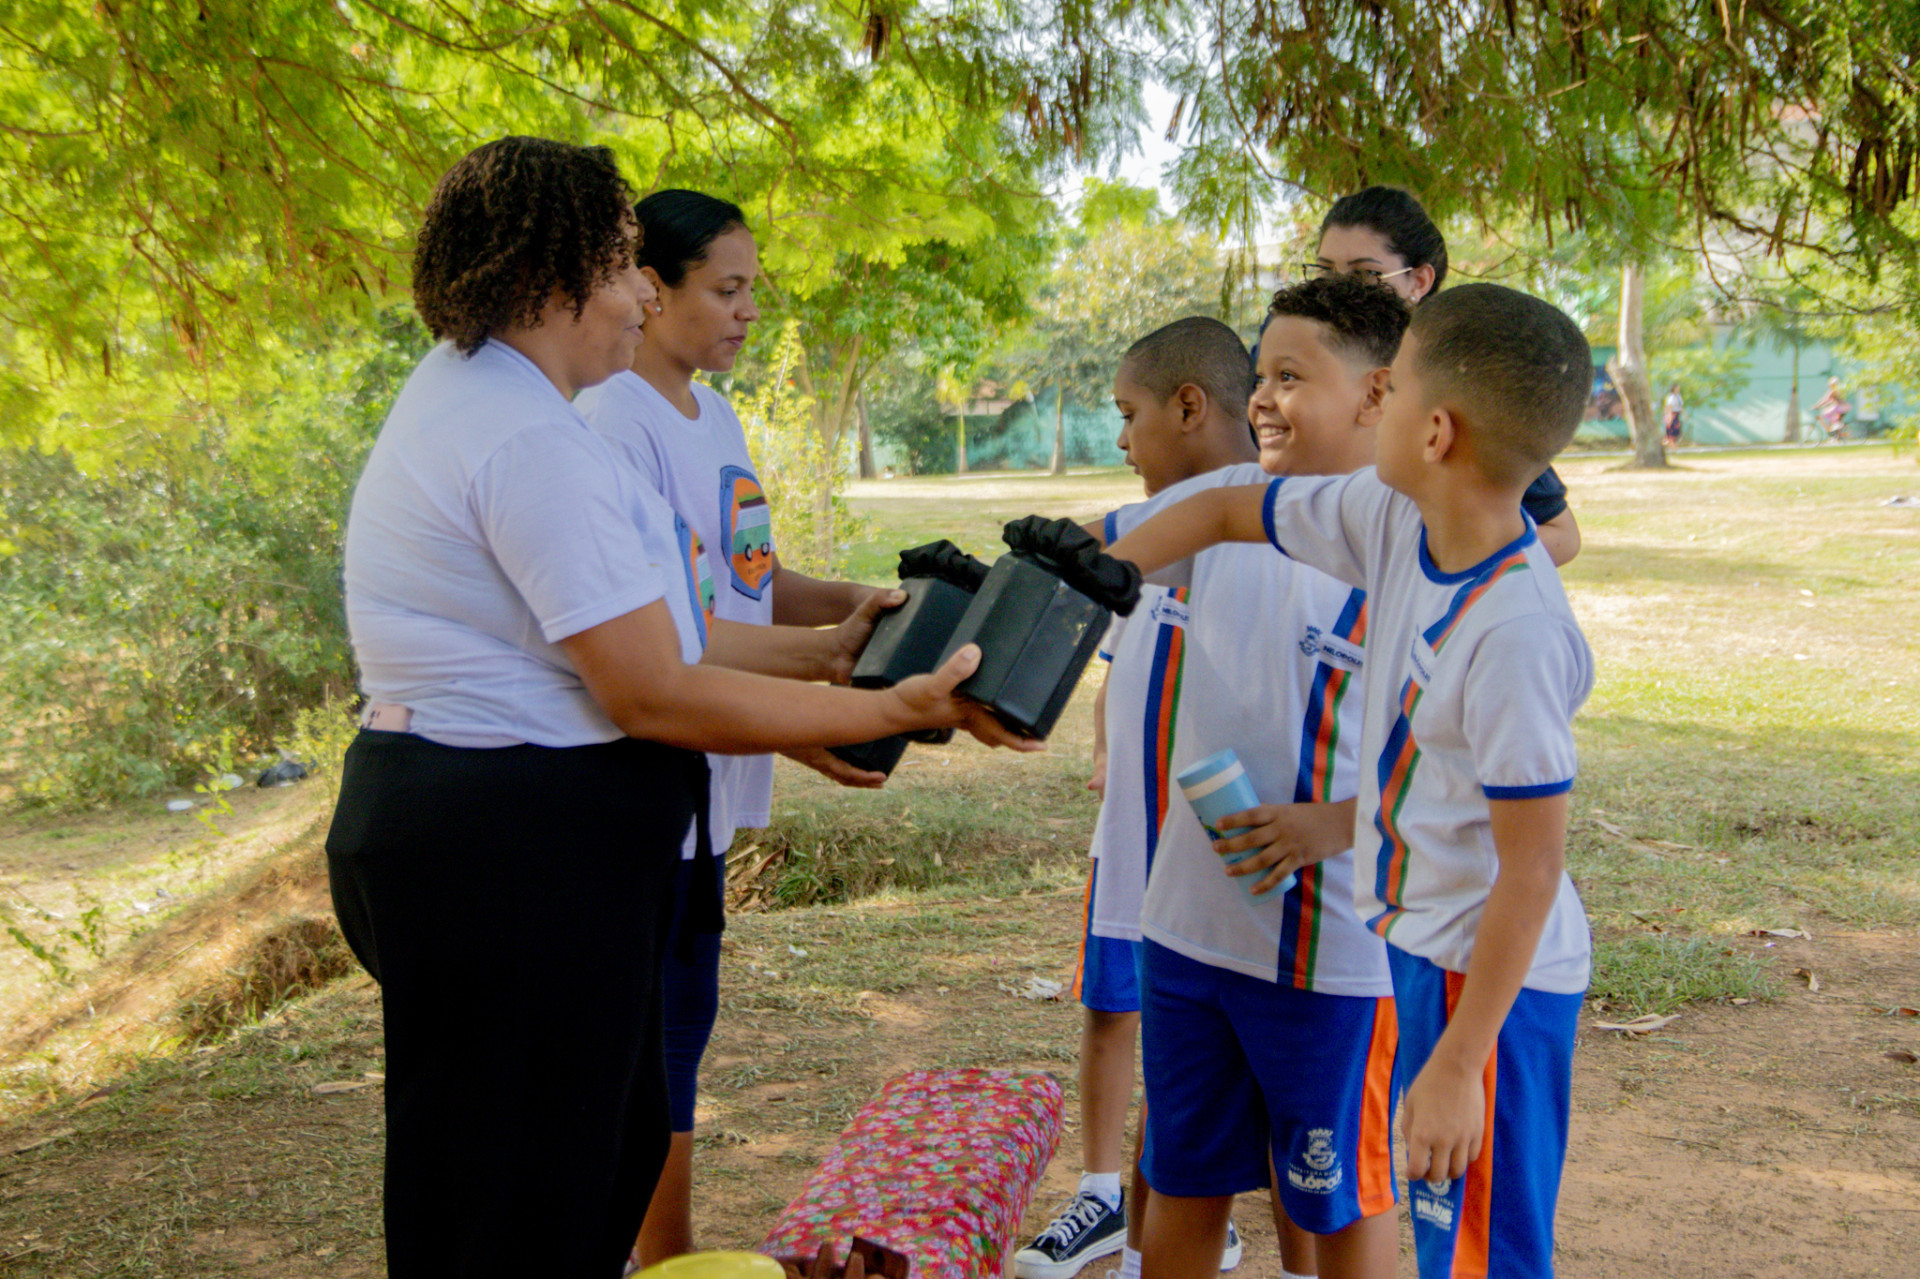 Students from EM Coronel Antonio Benigno Ribeiro participated in the Solos Itinerantes project, with a playful activity led by professor Sarah Lawall, from the Federal Rural University of Rio de Janeiro - Felipe Oliveira / PMN